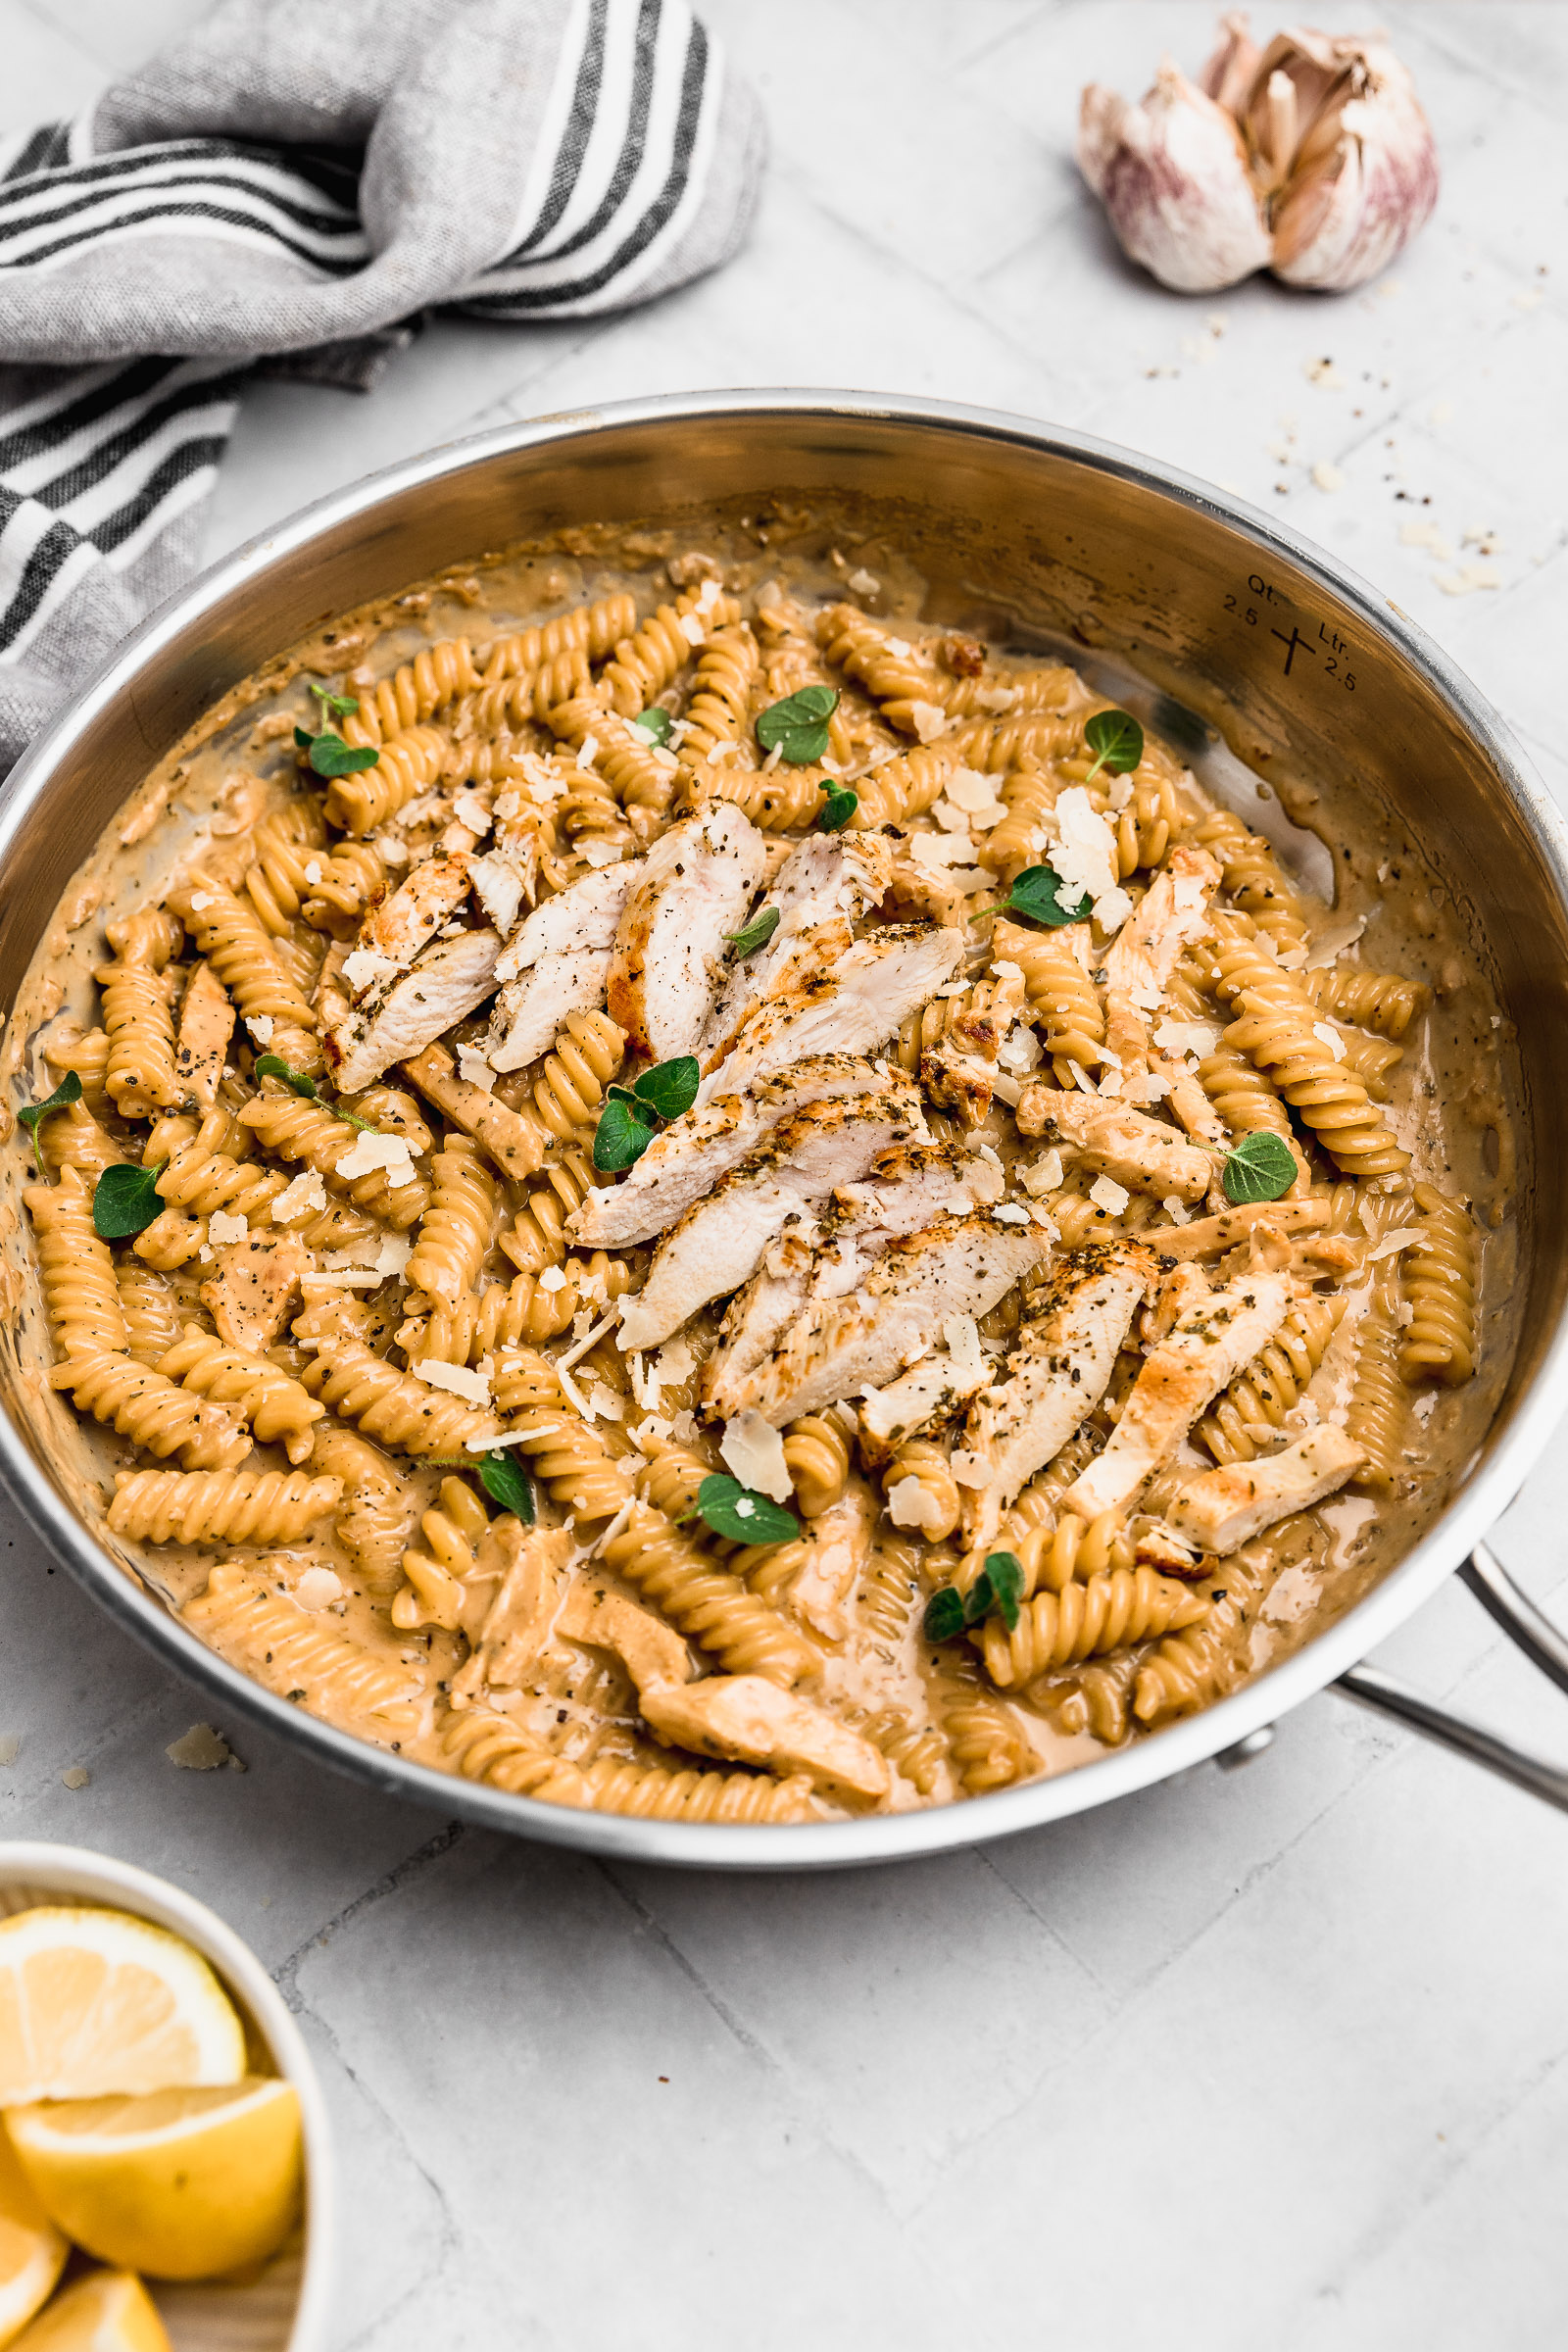 Picture of Garlic Parmesan Chicken Pasta in the pan, where you can see the glossy and creamy sauce, as well as the golden chicken slices, fresh oregano leaves and parmesan flakes